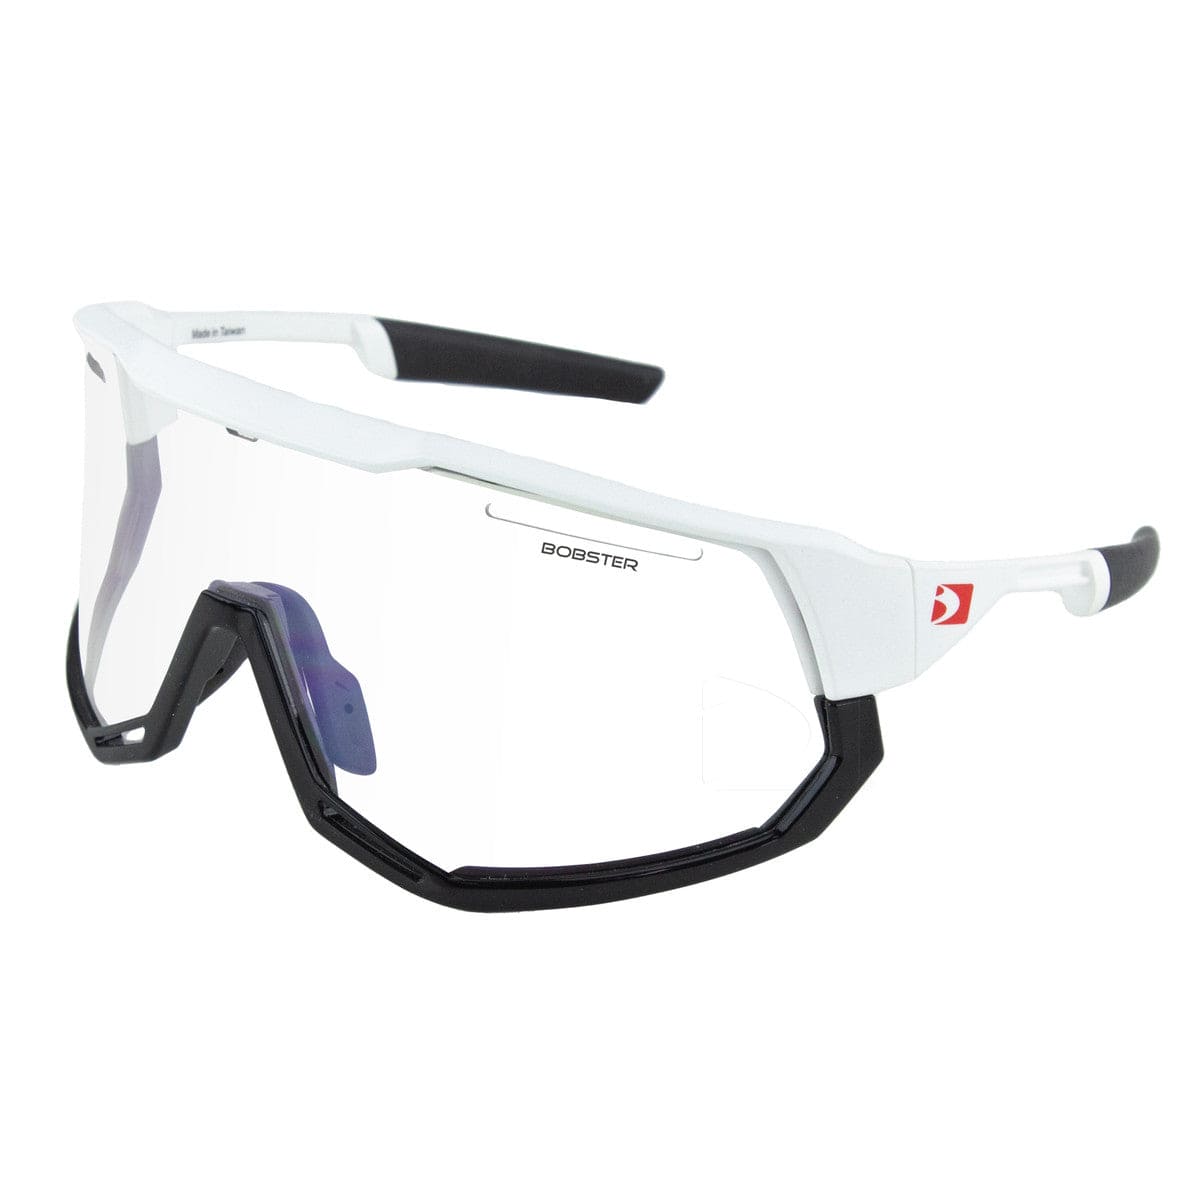 Bobster Freewheel Cycling Sunglasses shown with Clear lens installed